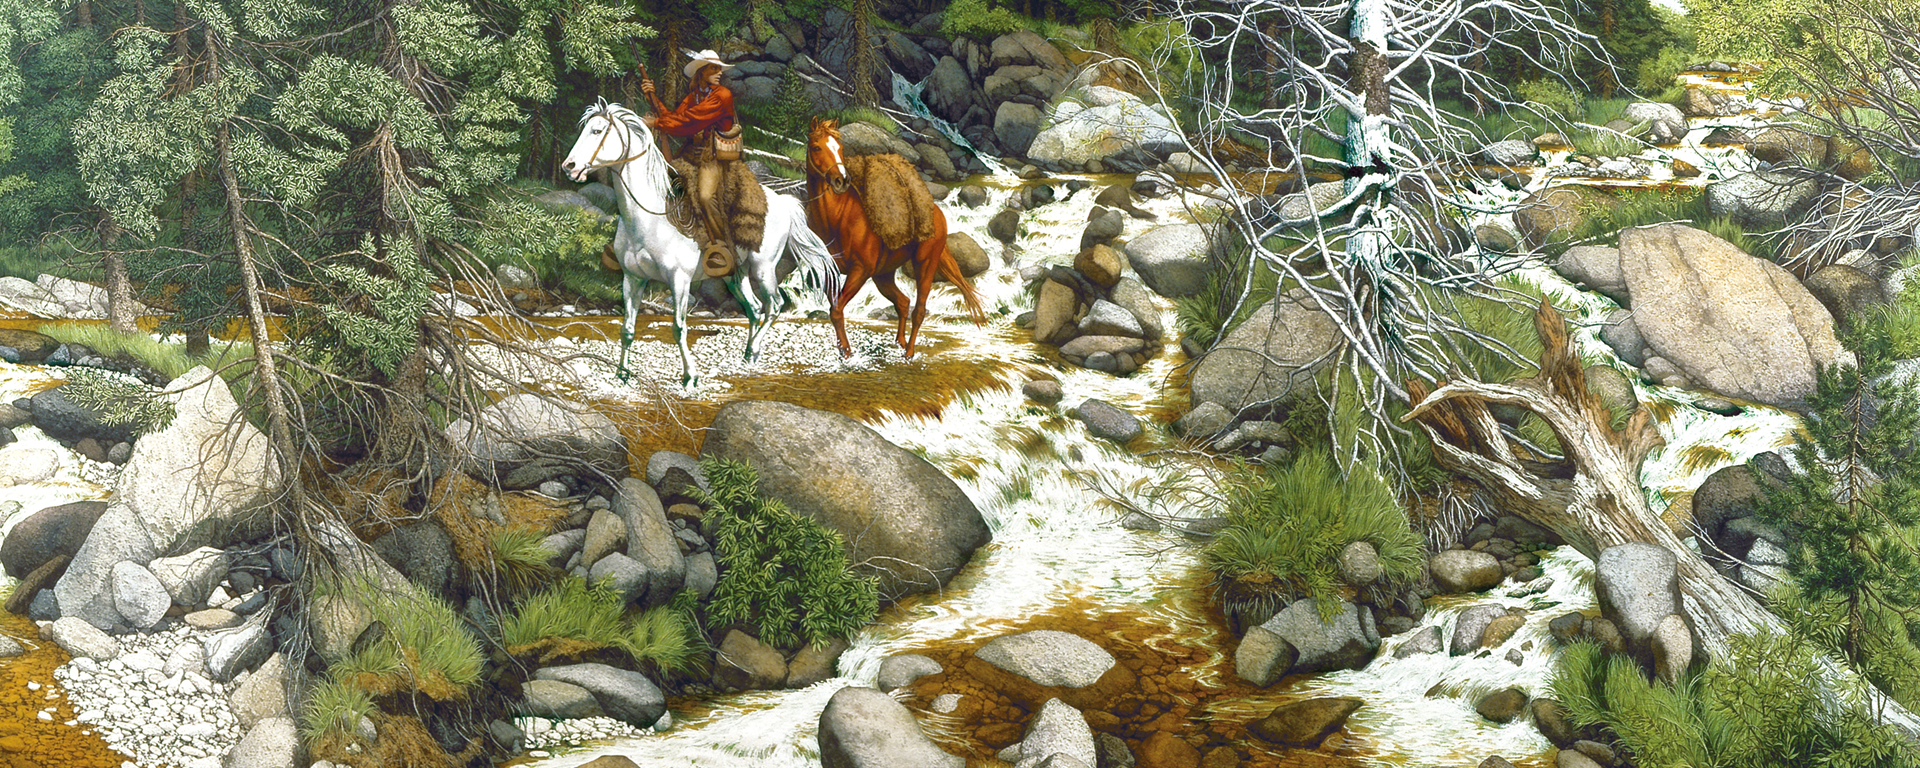 man riding horse with pack horse trailing through stream and woods with indigenous faces hidden in image